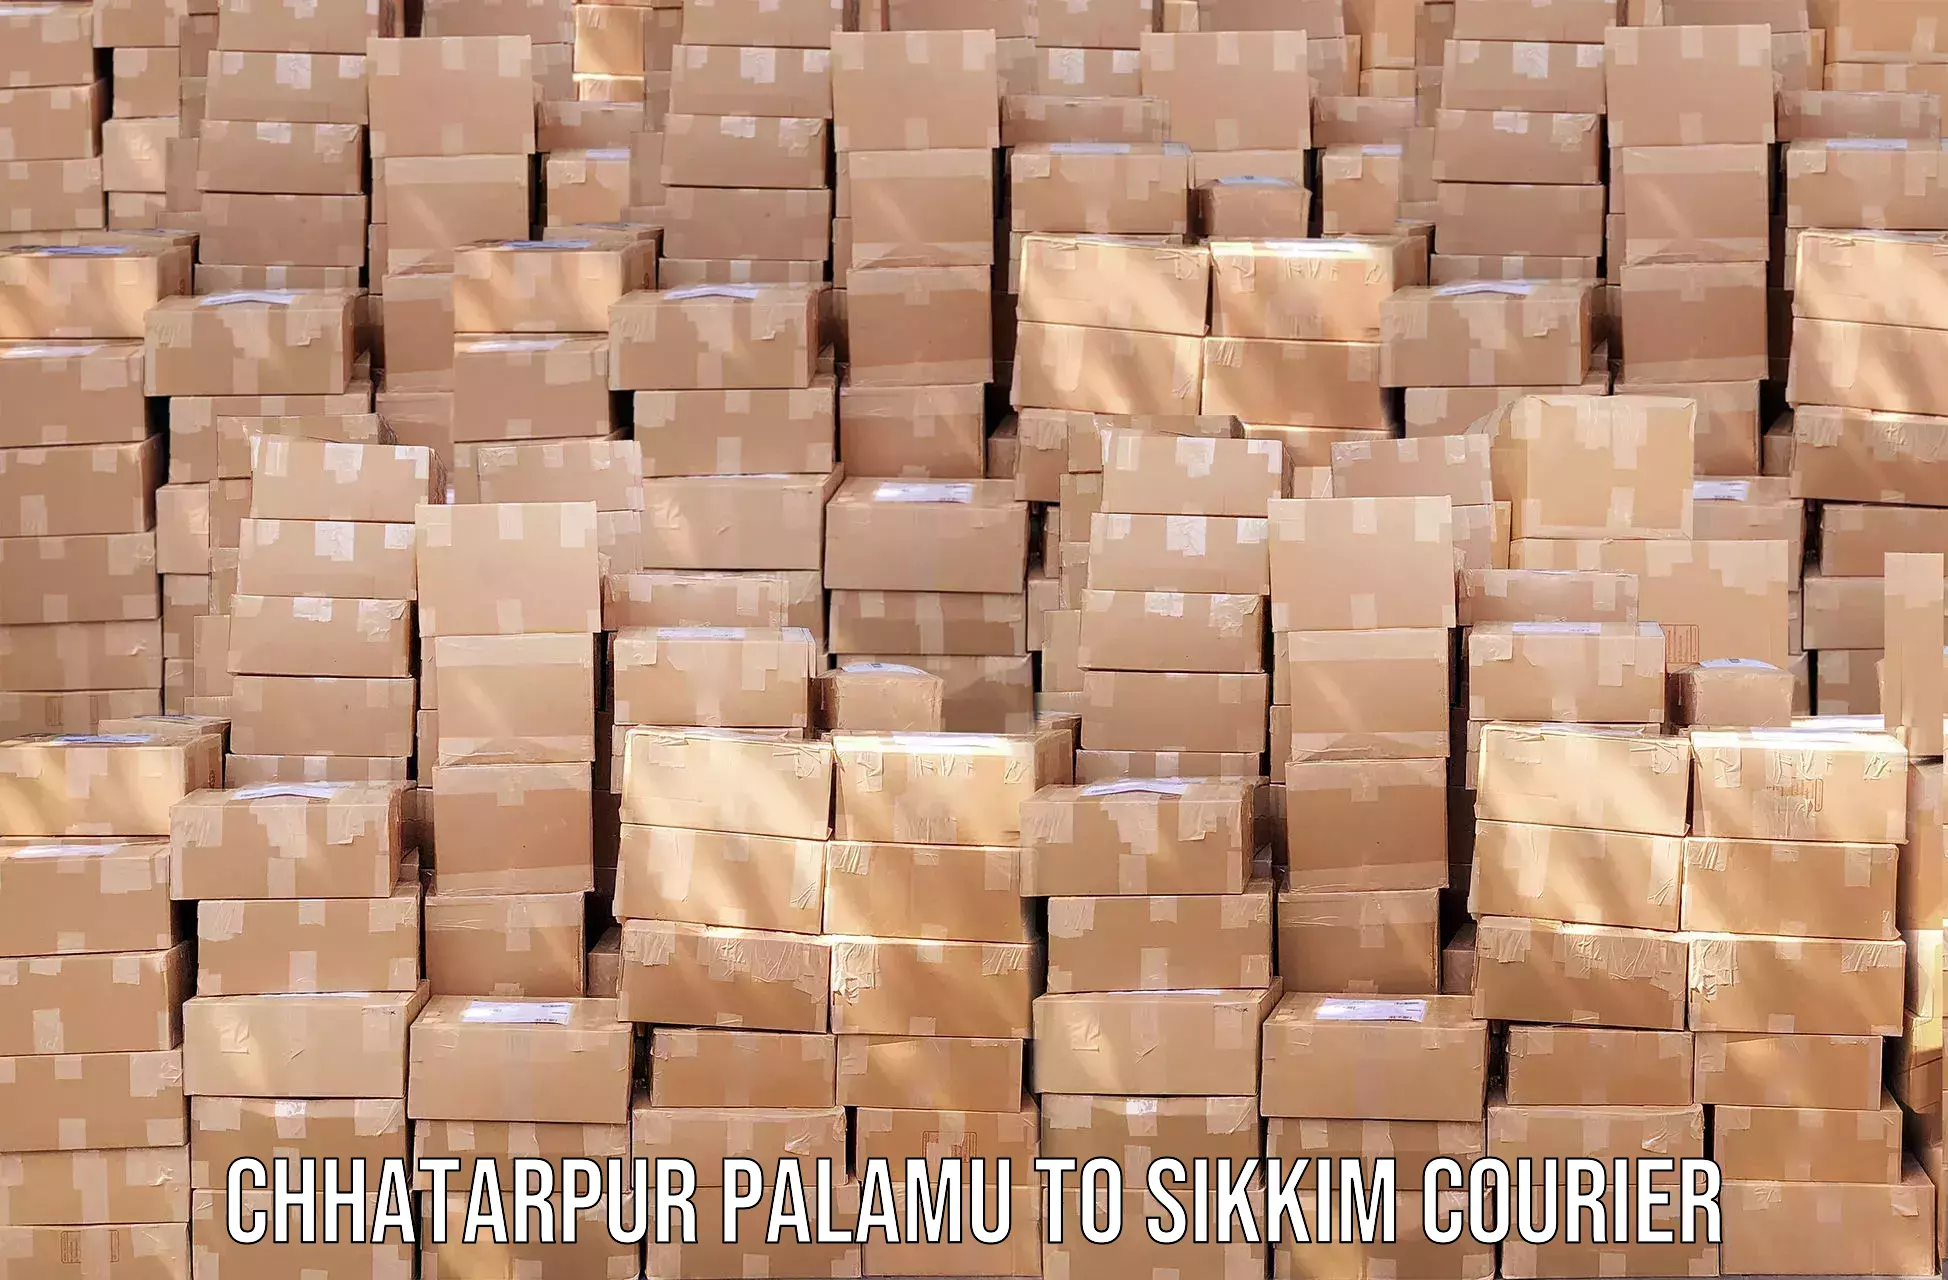 Weekend courier service in Chhatarpur Palamu to Pelling